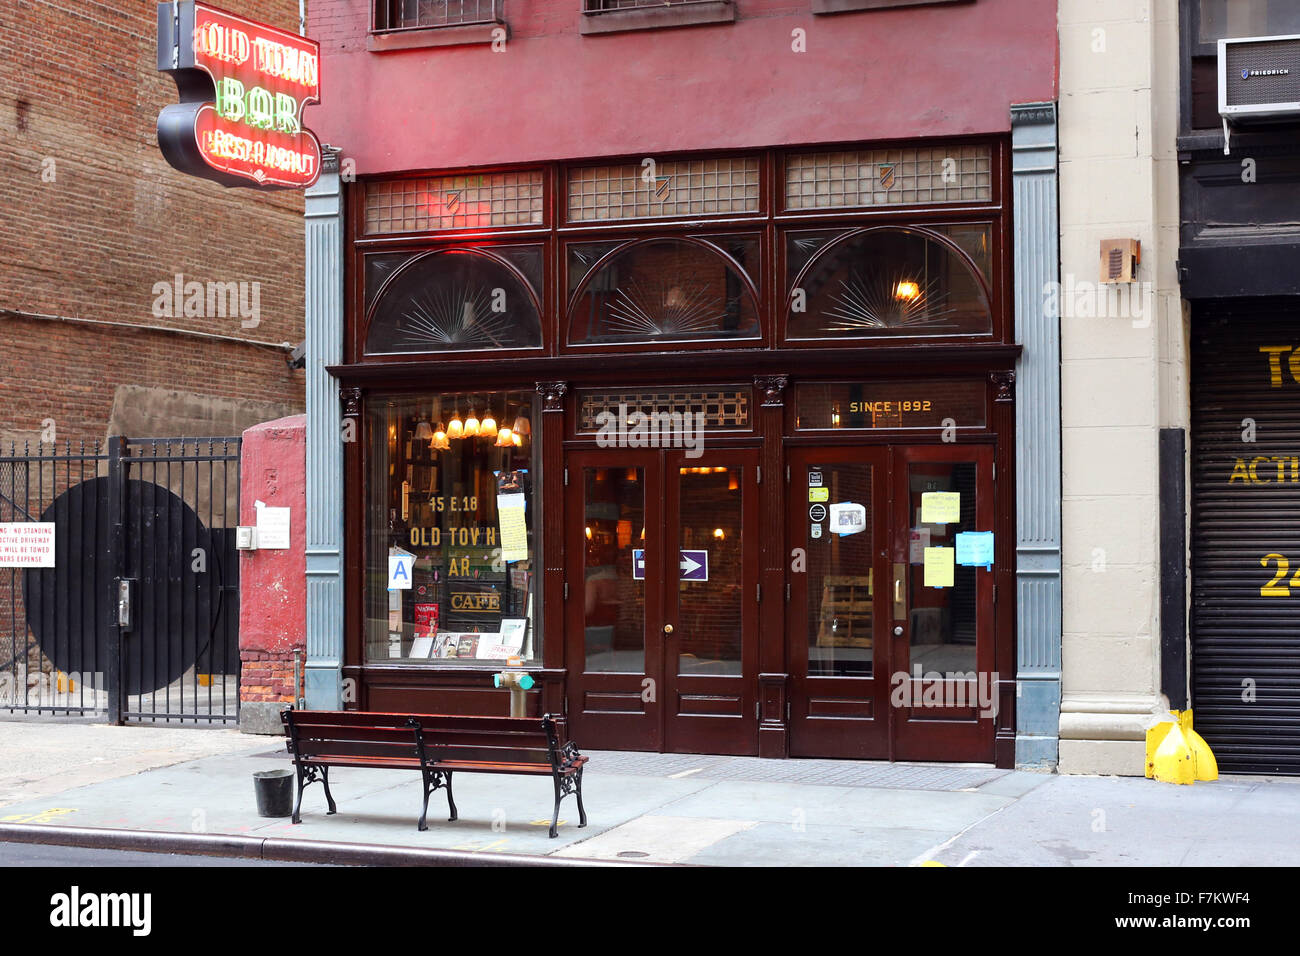 Old Town Bar and Restaurant, 45 E.18th St, New York. exterior storefront of a bar and restaurant in the Gramercy neighborhood of Manhattan. Stock Photo